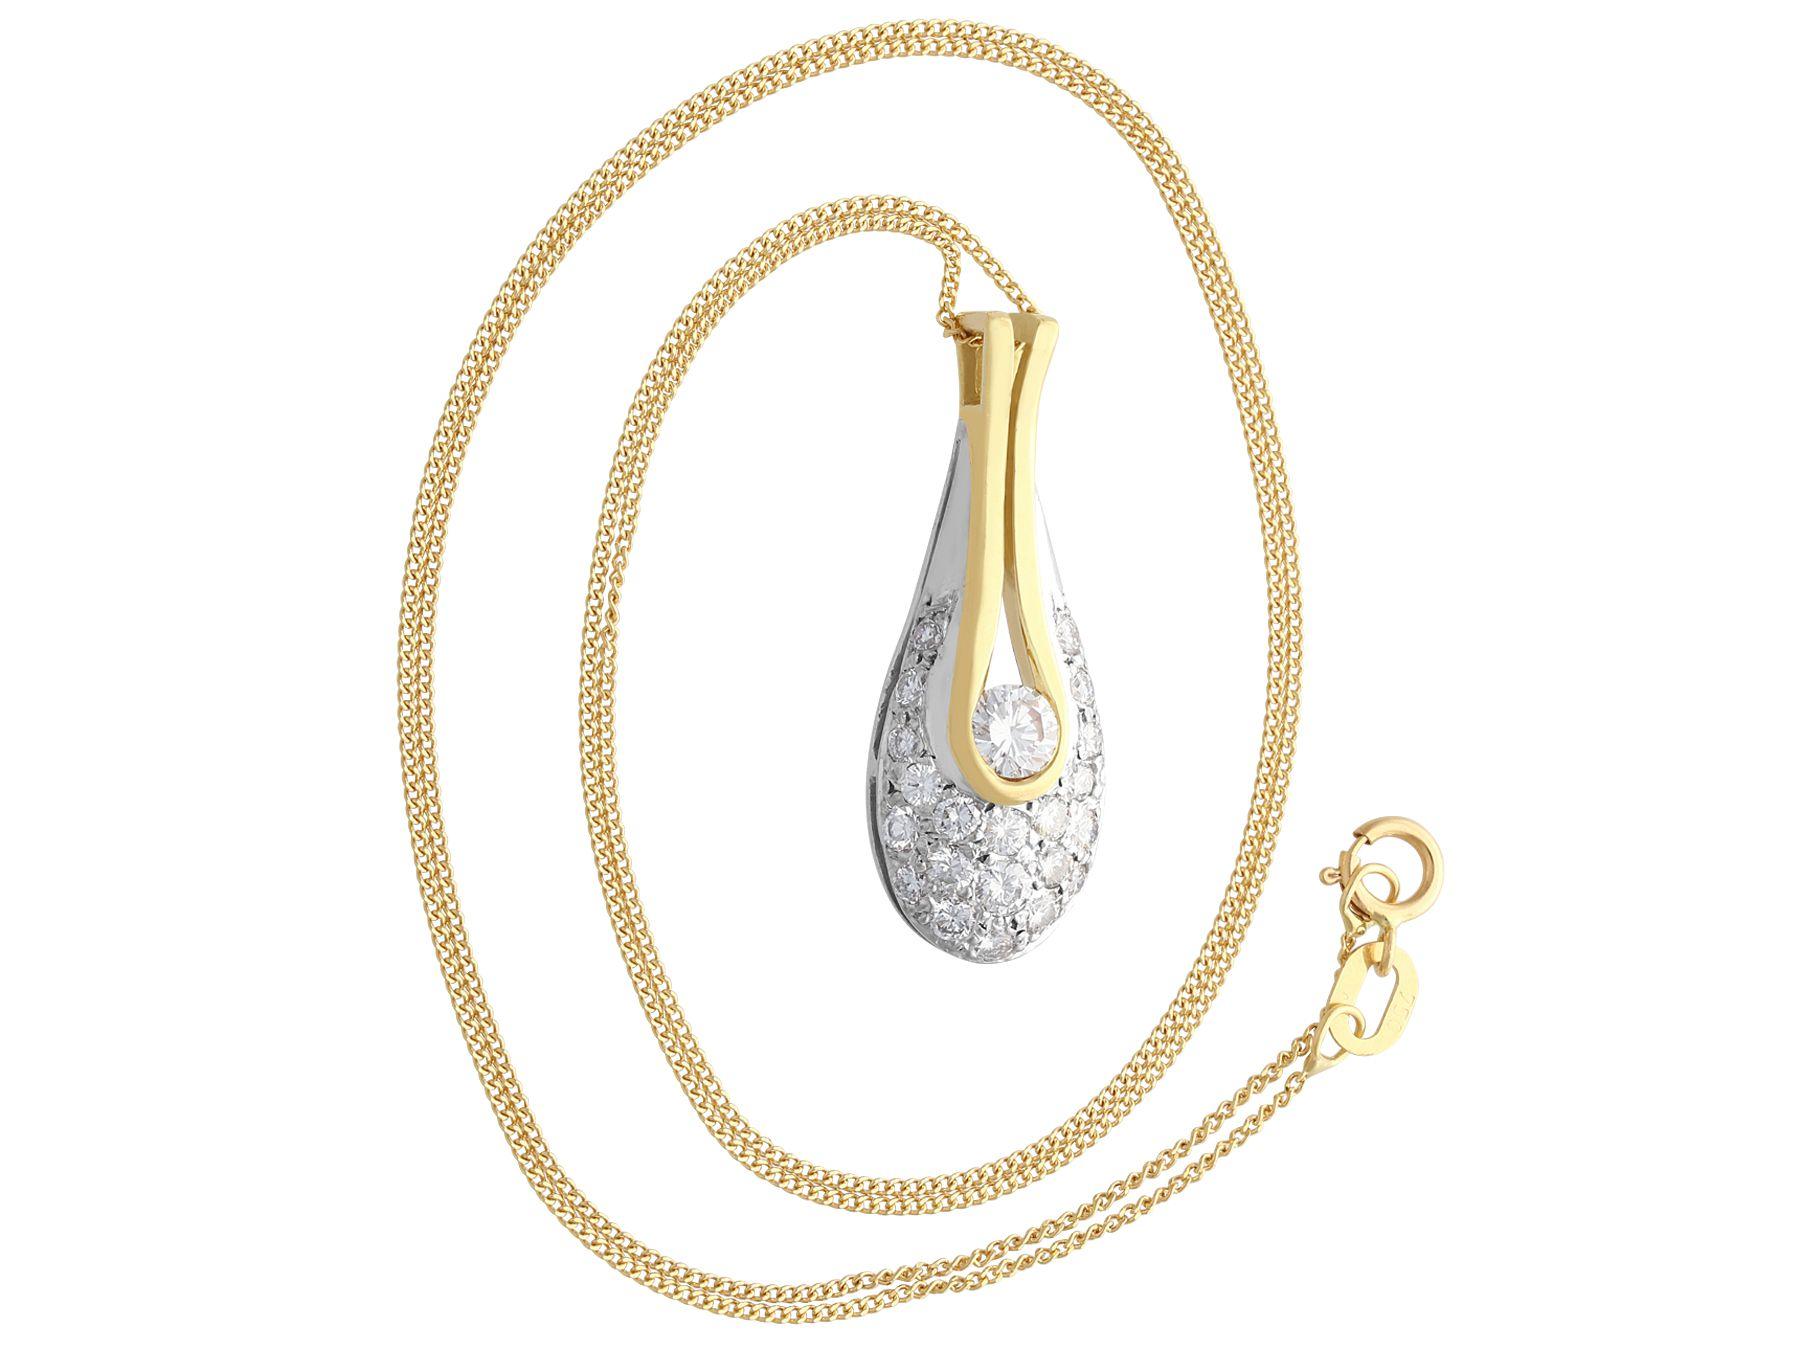 An impressive vintage 0.93 carat diamond, 18 karat yellow gold and 18 karat white gold 'teardrop' pendant; part of our diverse vintage jewelry collections.

This fine and impressive diamond teardrop pendant has been crafted in 18k yellow gold and